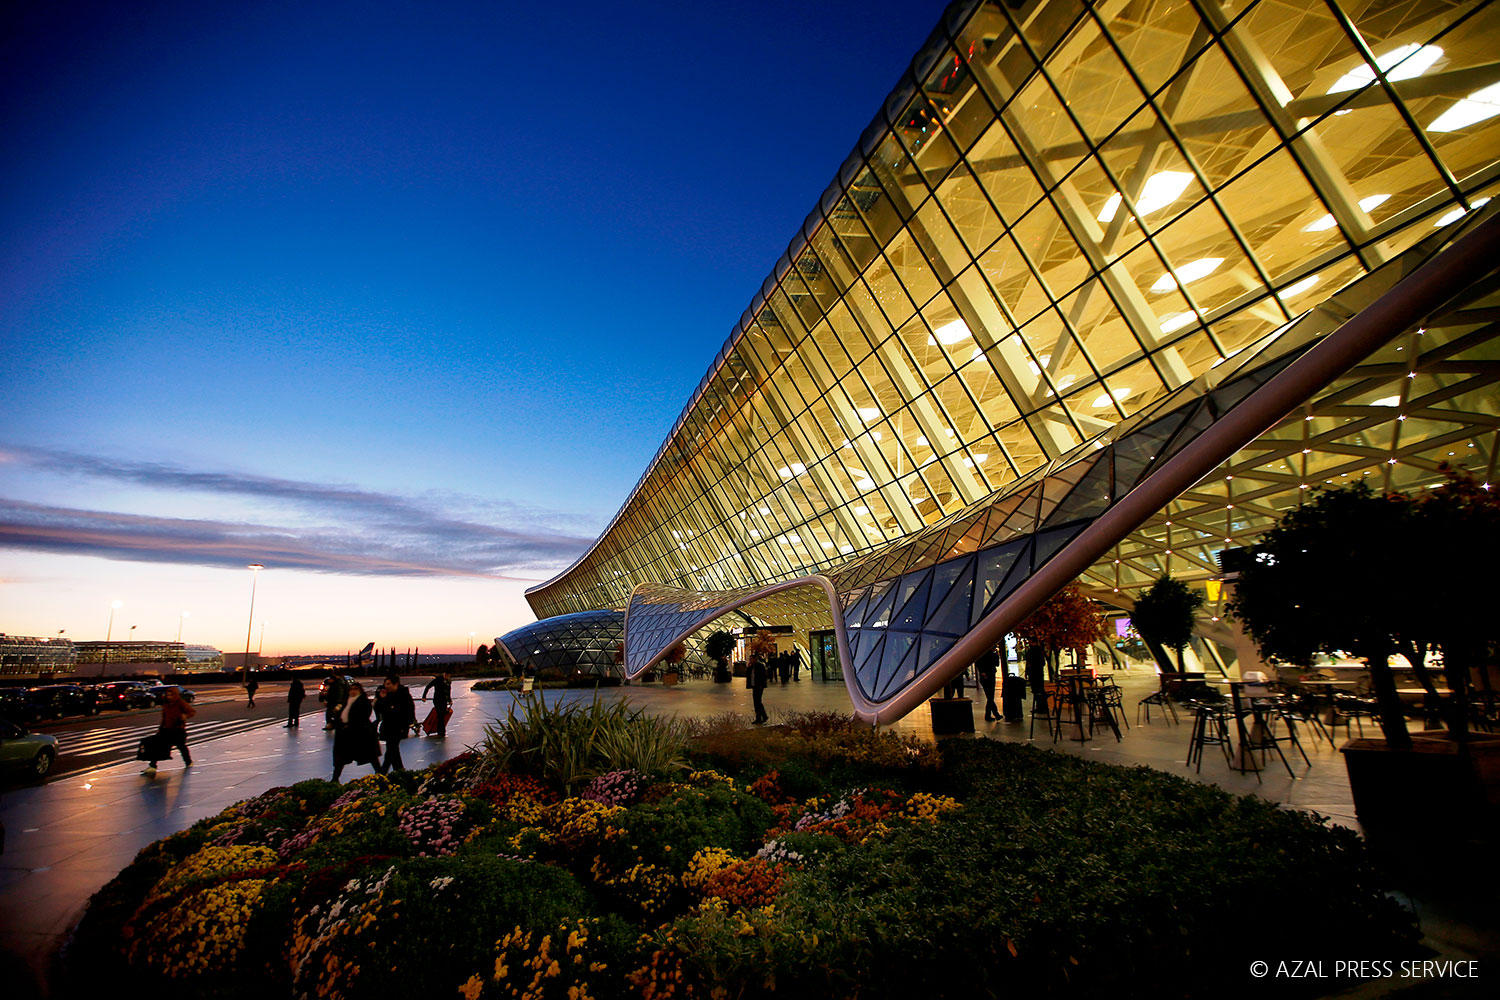 Heydar Aliyev Airport can serve as hub to bring tourists from Caspian region to Spain: charge d'affaires